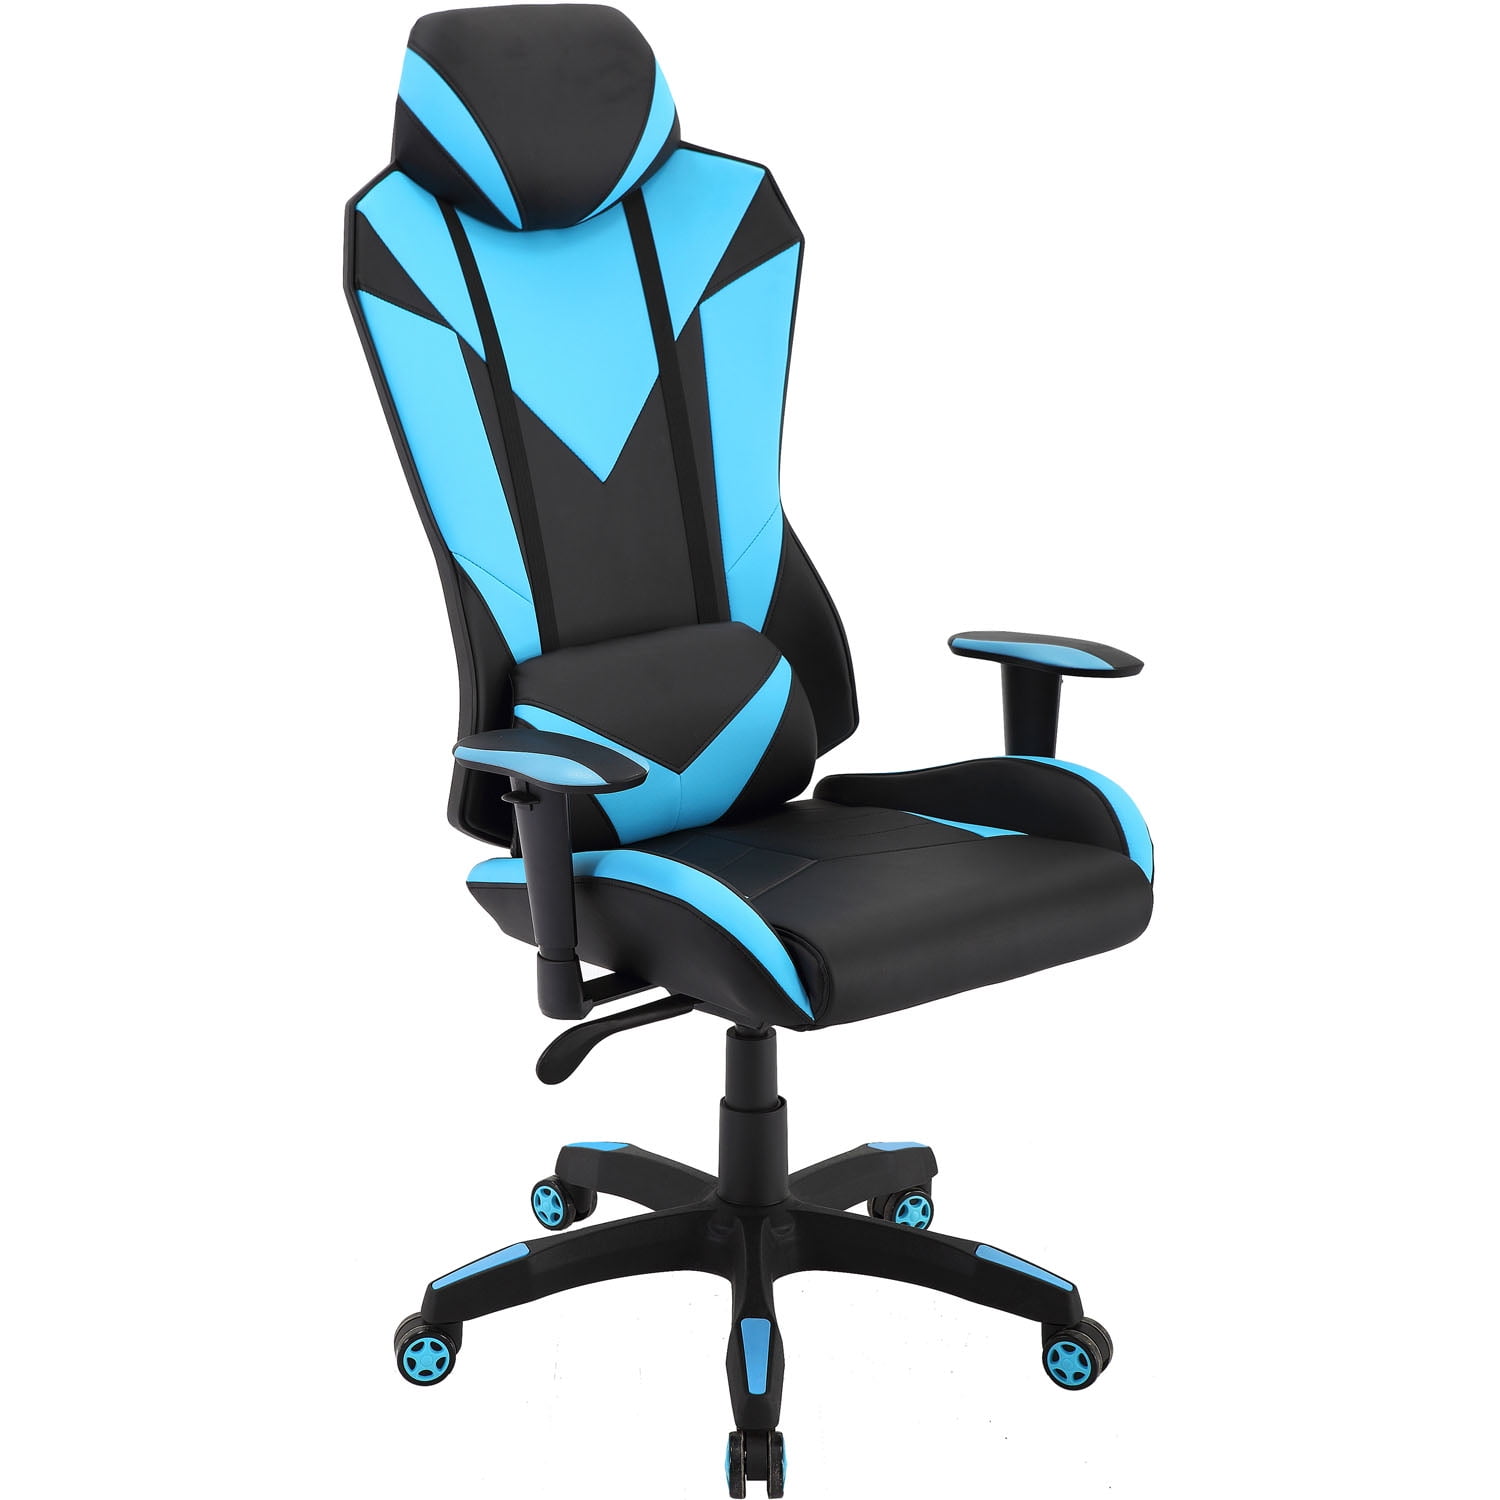 Hanover Commando Ergonomic High-Back Gaming Chair in Black and Electric